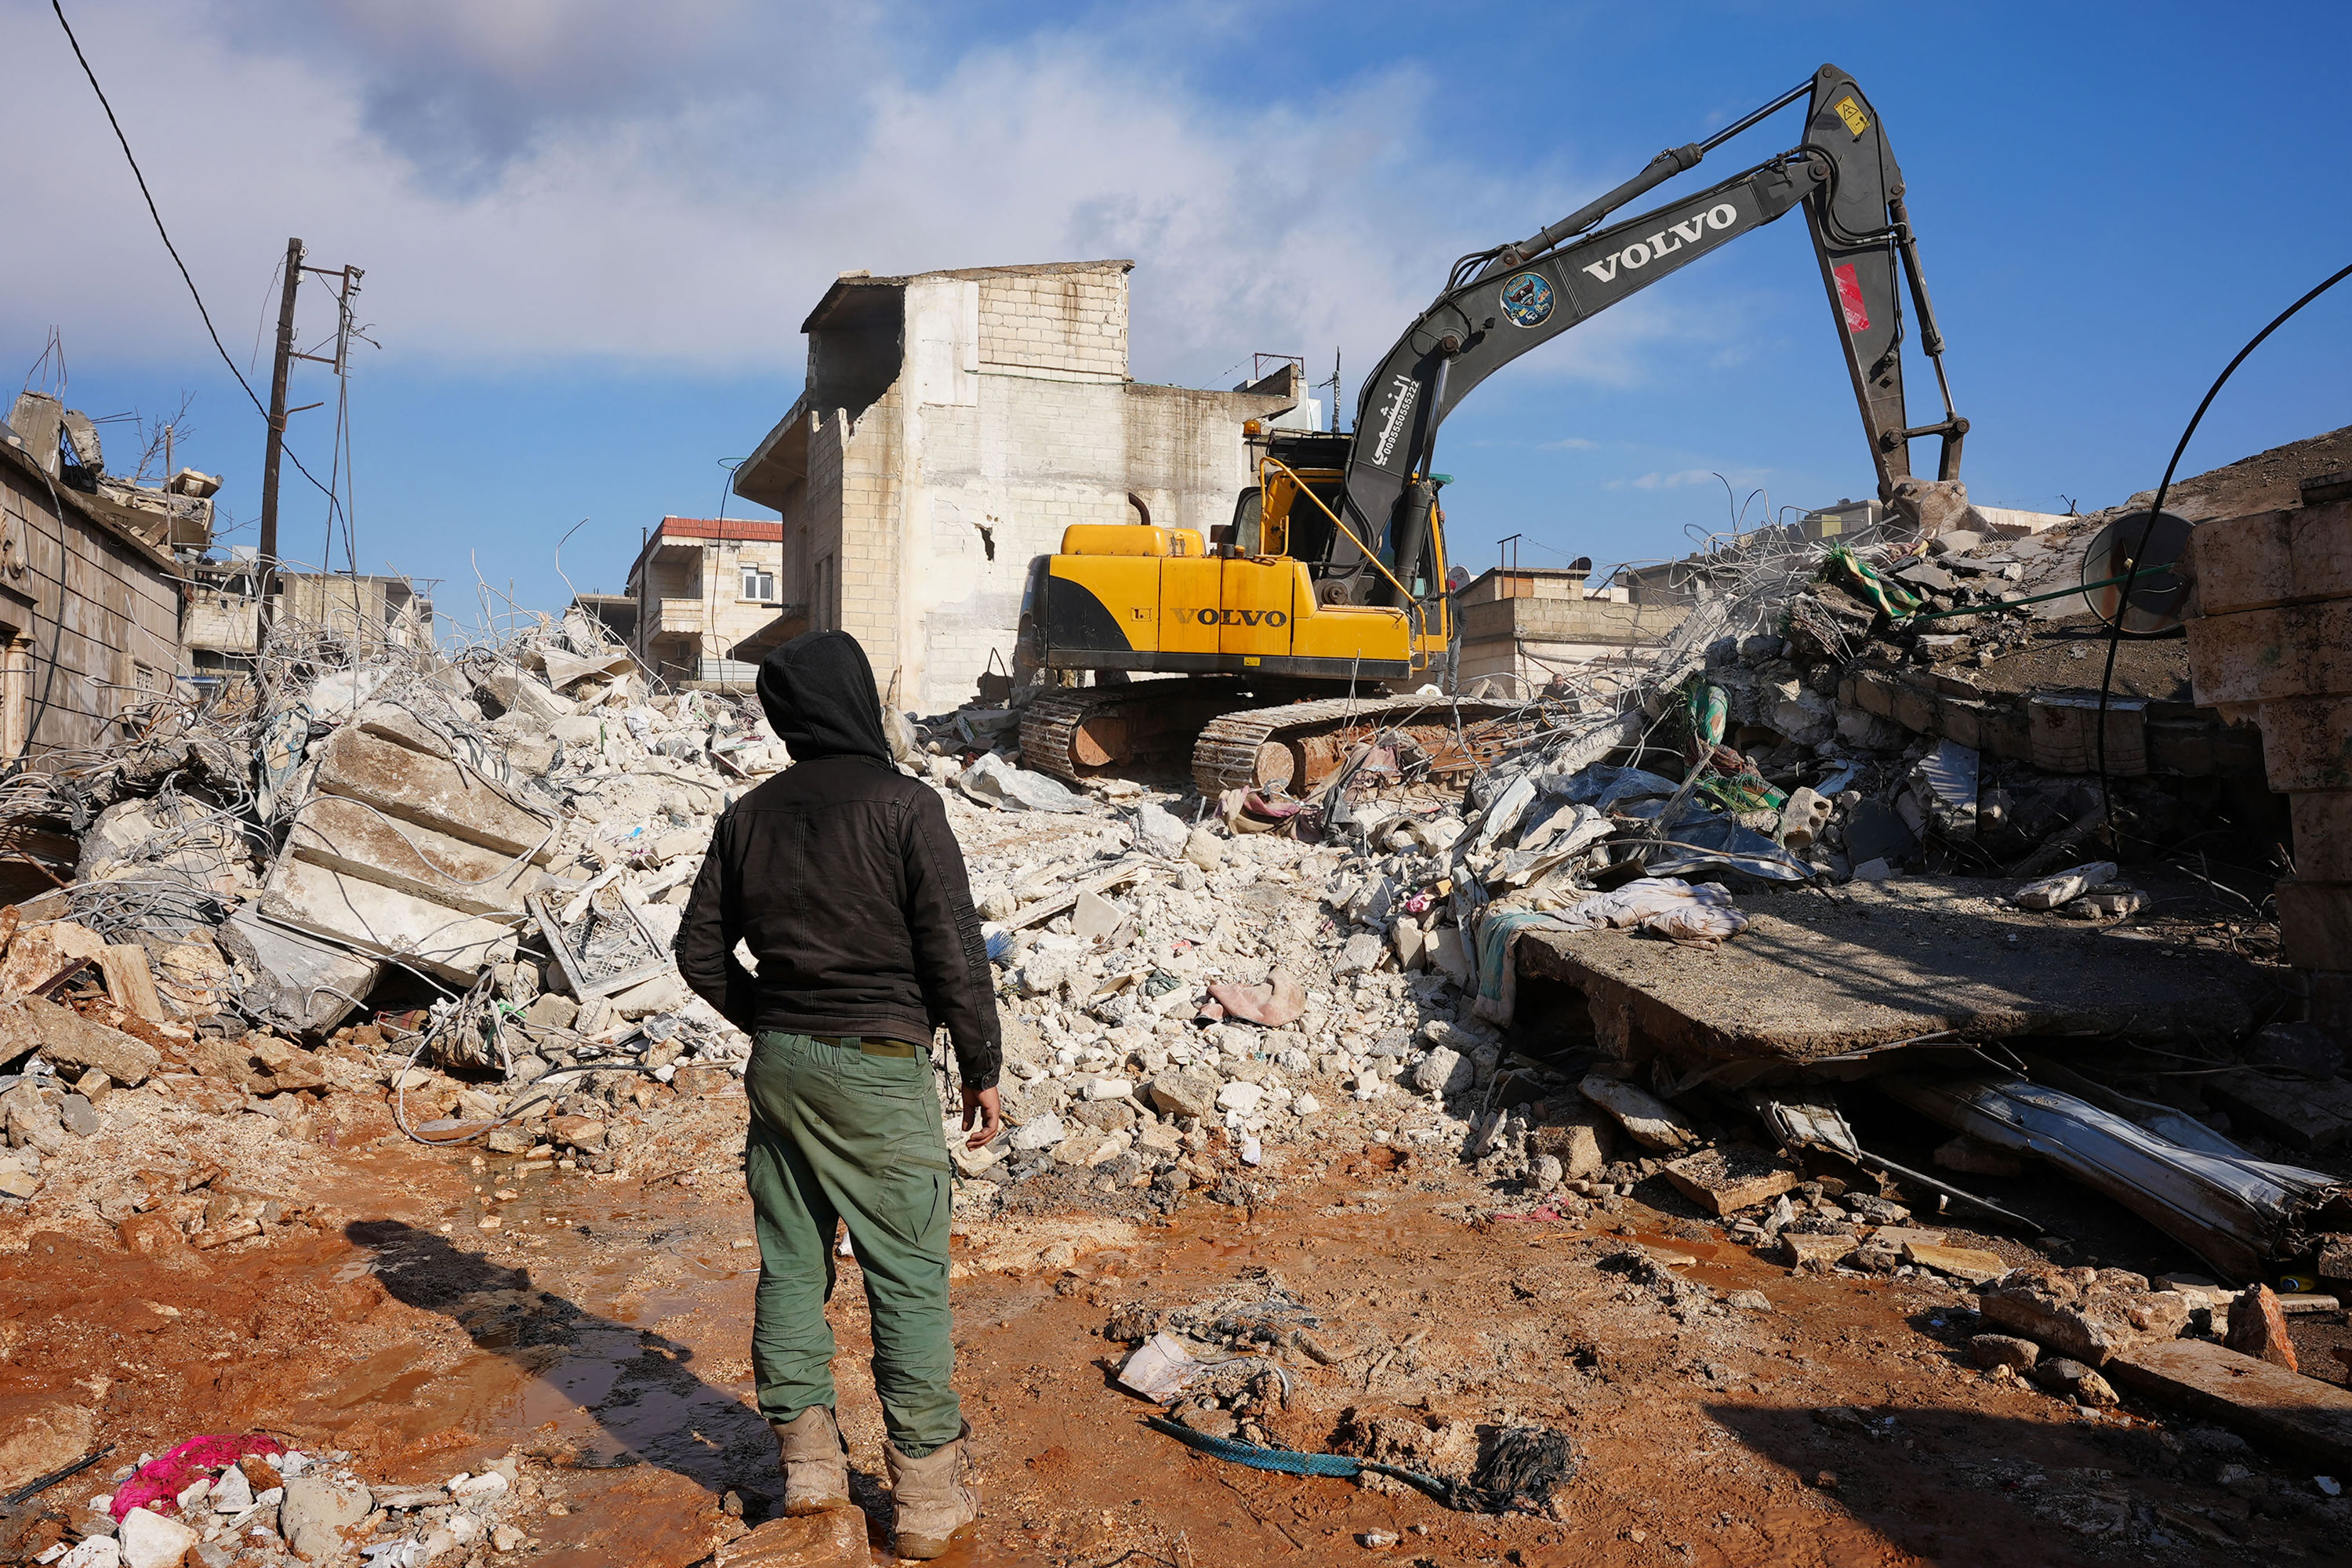 A person watches as an excavator goes through the rubble of the building where the baby's family was killed.